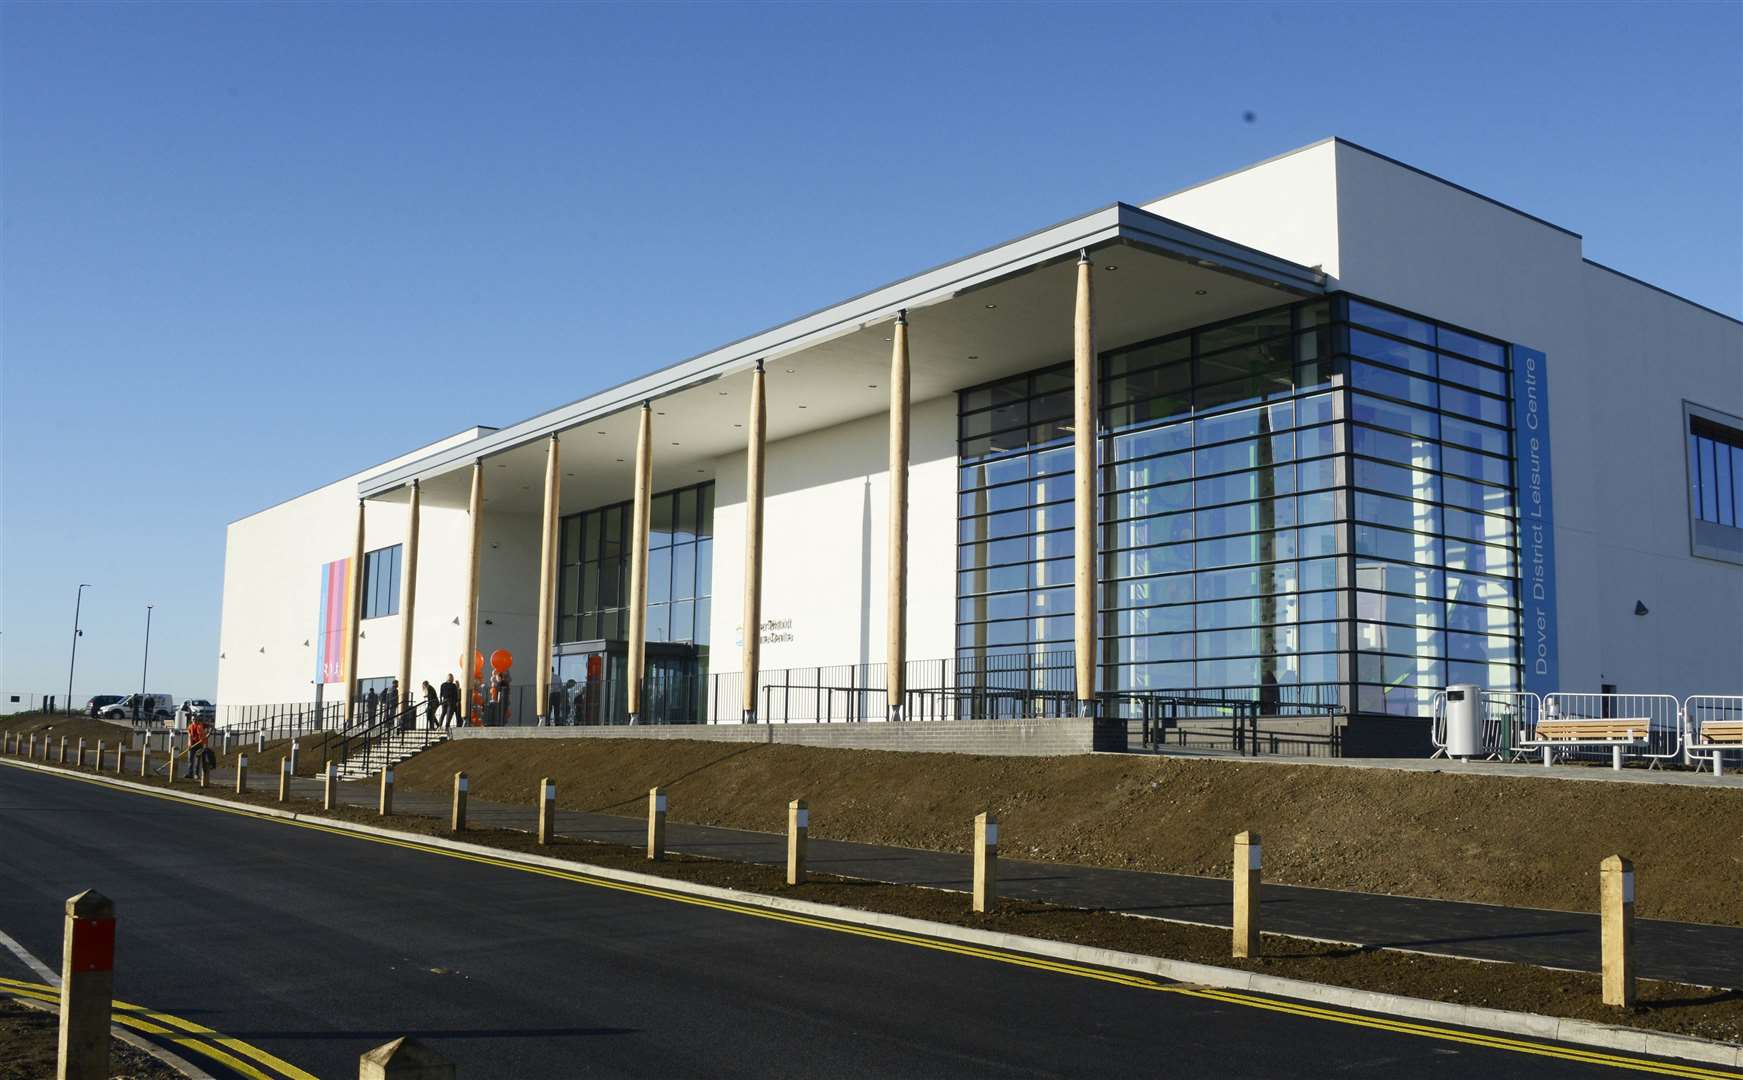 The new leisure centre Picture: Paul Amos